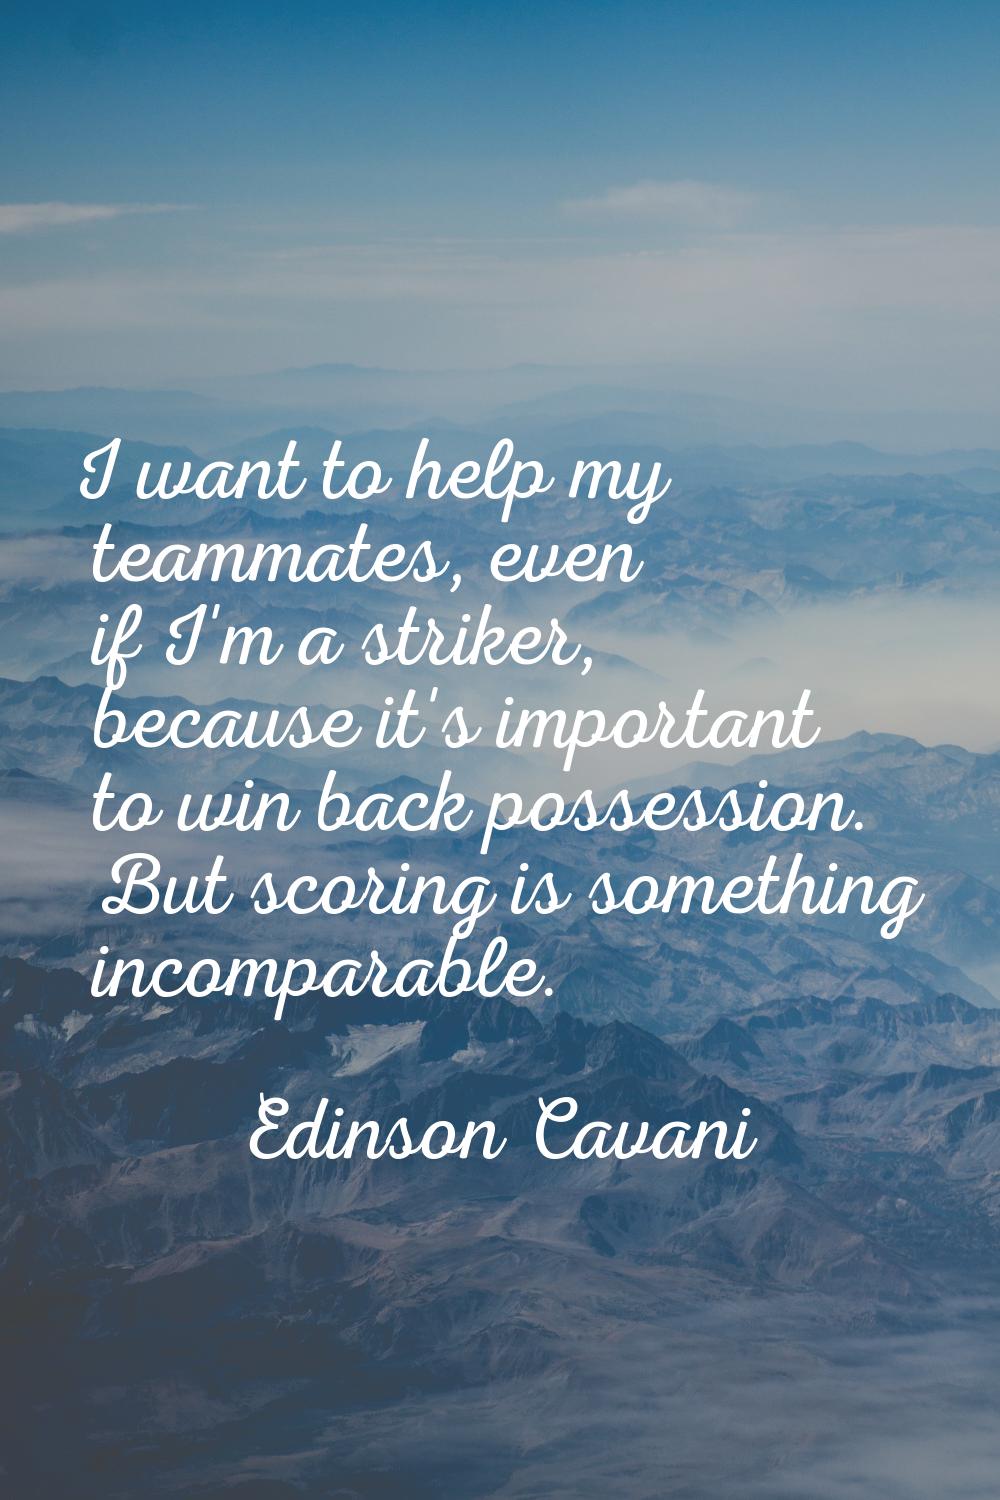 I want to help my teammates, even if I'm a striker, because it's important to win back possession. 